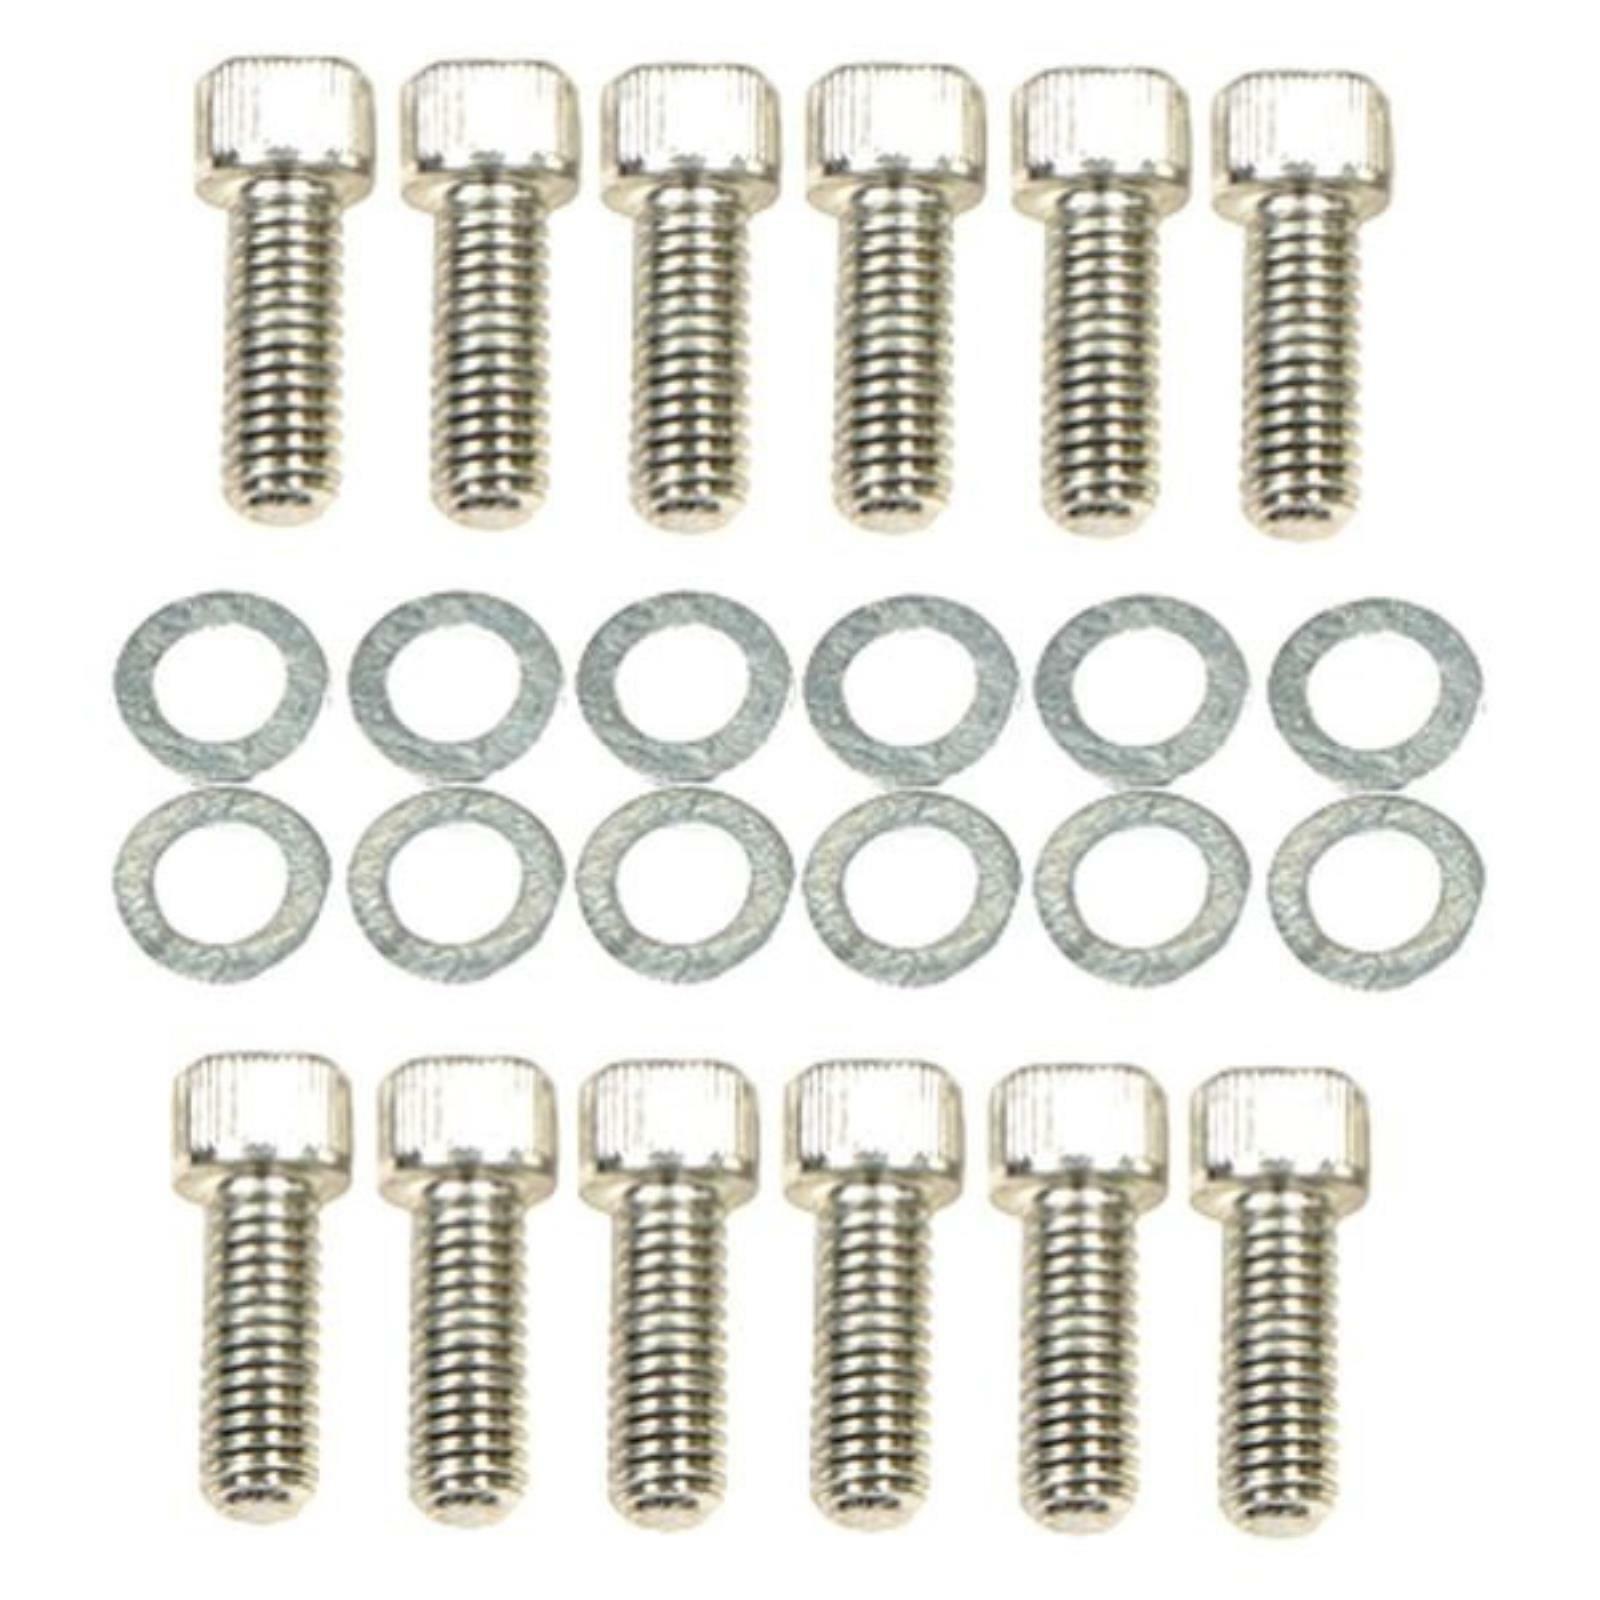 Intake Manifold Bolt Kit Fits 1976-1980 Plymouth Volare